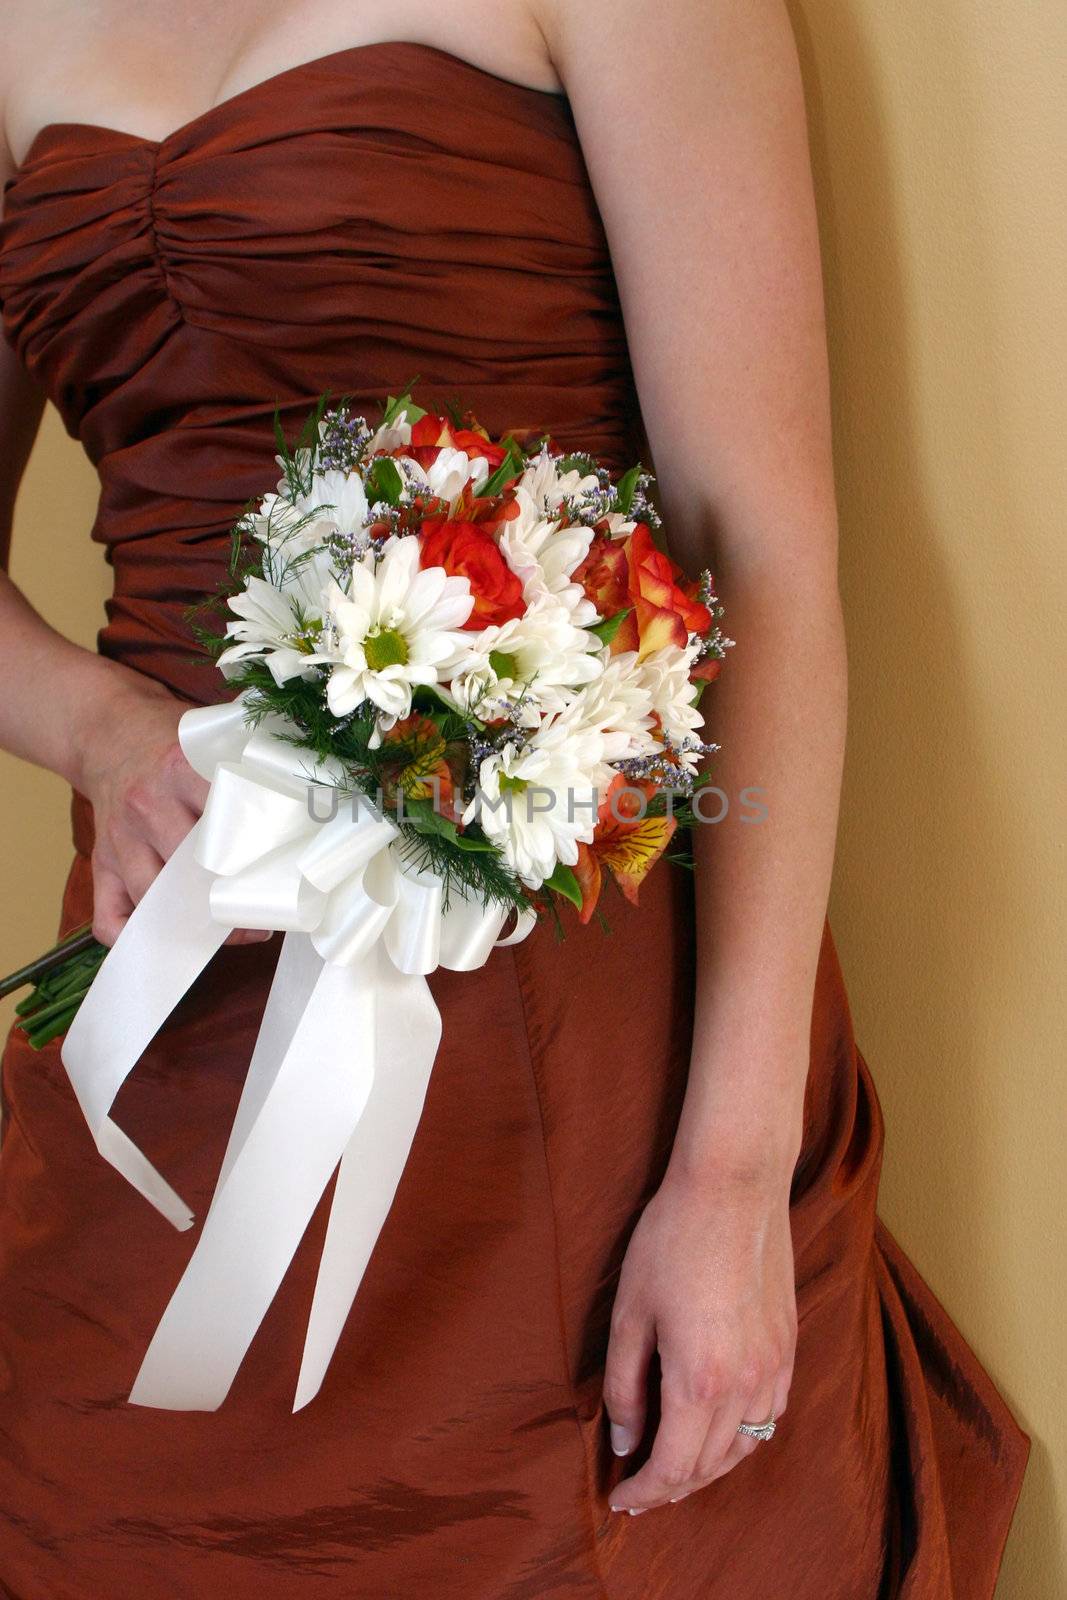 A nice shot of the maid of honor's bouquet.